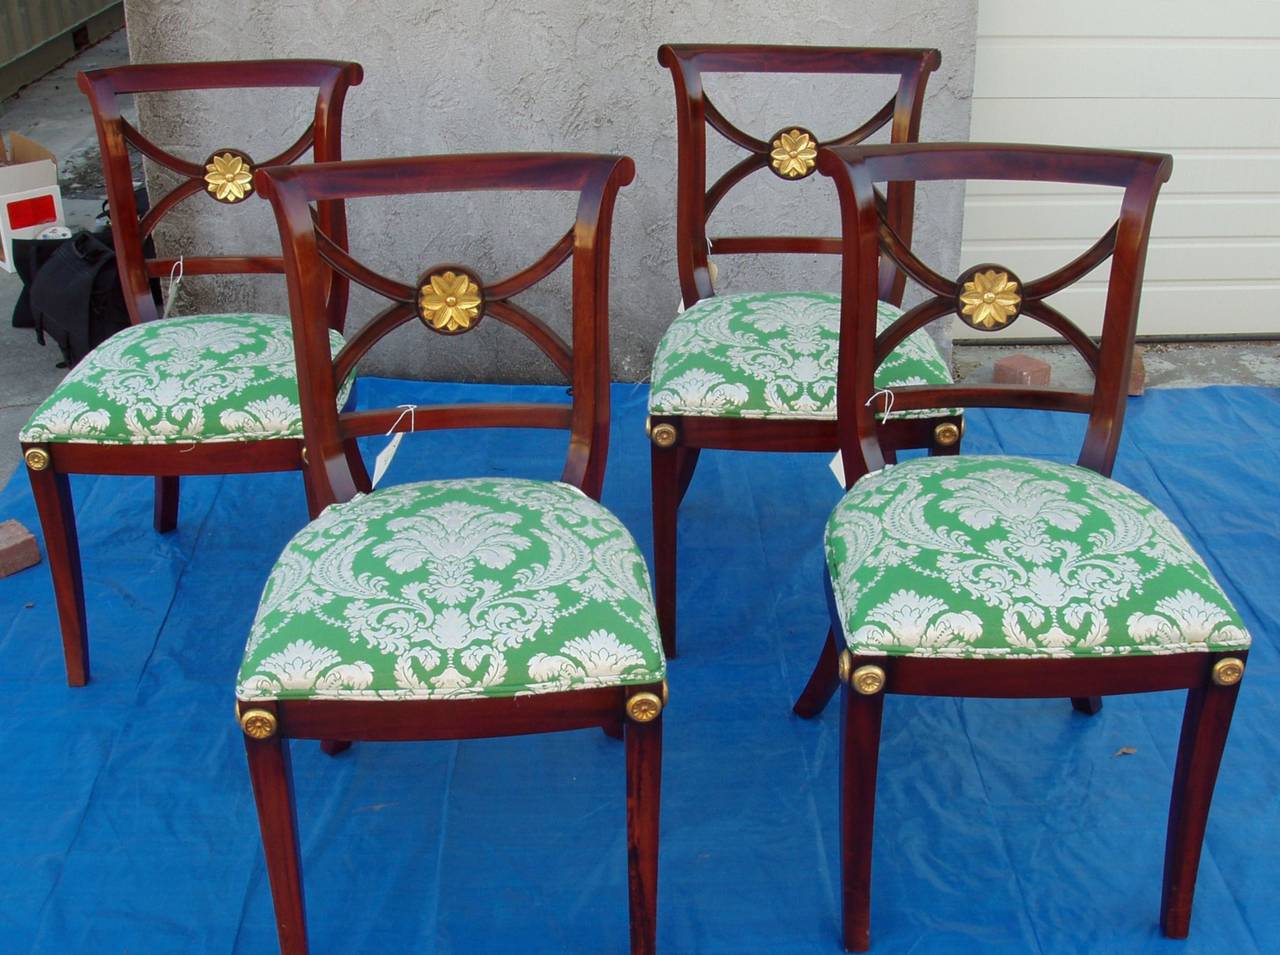 To the Manor born chairs, o if chairs were socialites, here they are!
High style highly detailed 19th century set of four Regency Klismos style mahogany chairs. We have not seen a more beautiful set of chairs of this style. Distinctive gold leaf